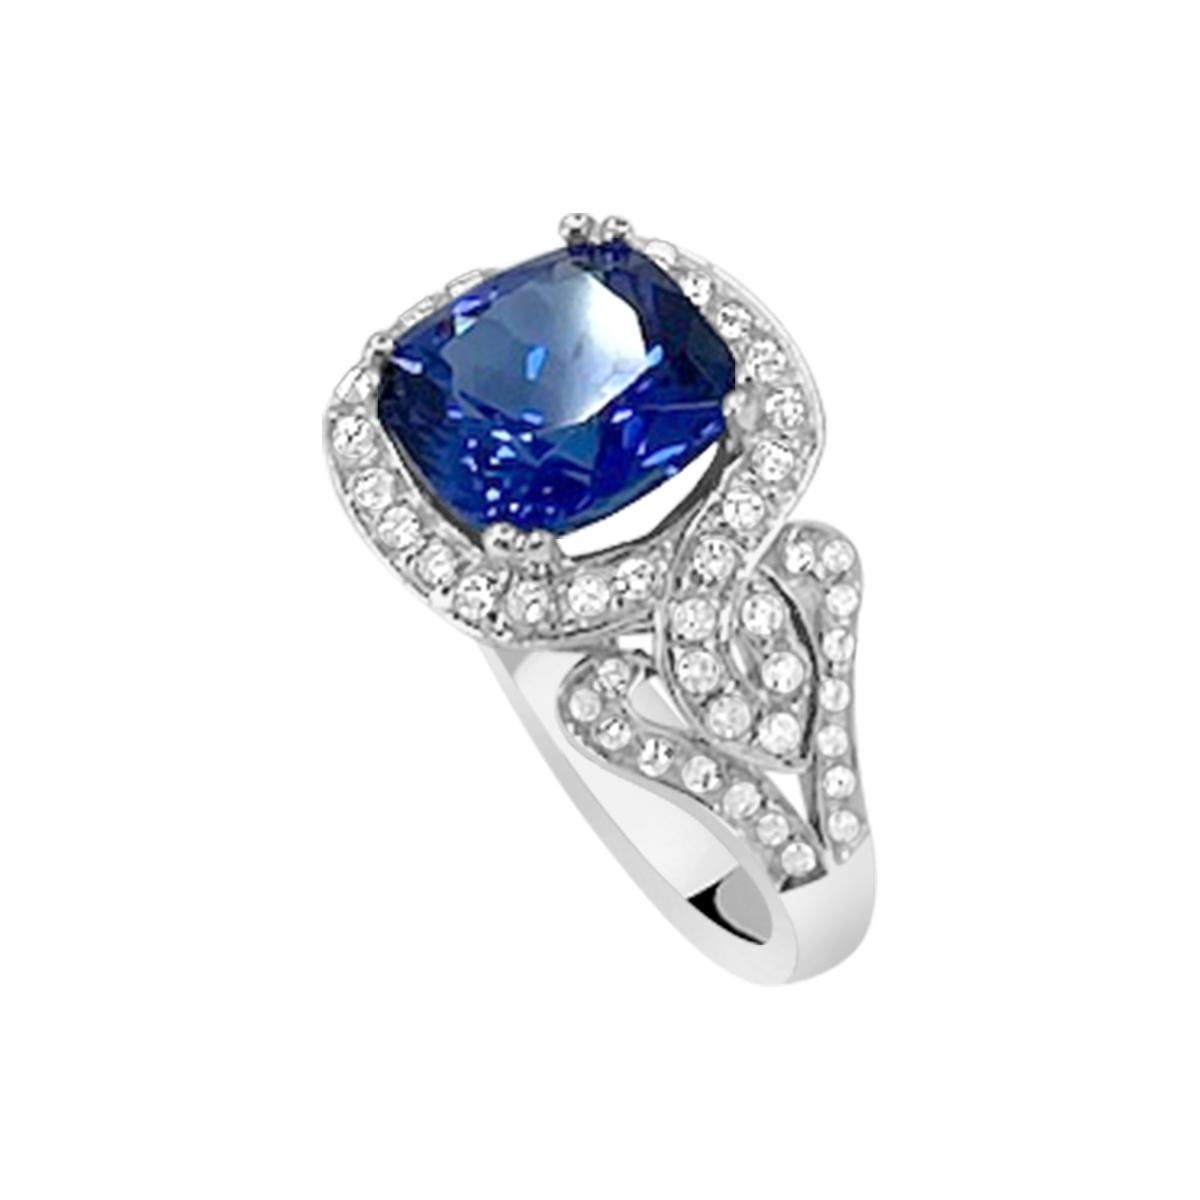 Elegant 9.5mm square cushion tanzanite ring. Beautiful cut and color. Surrounded by white diamonds this ring will embrace any finger.

Style# REN22639
Tanzanite: Square cush 4.33cts
Diamond: 60pcs 0.77cts